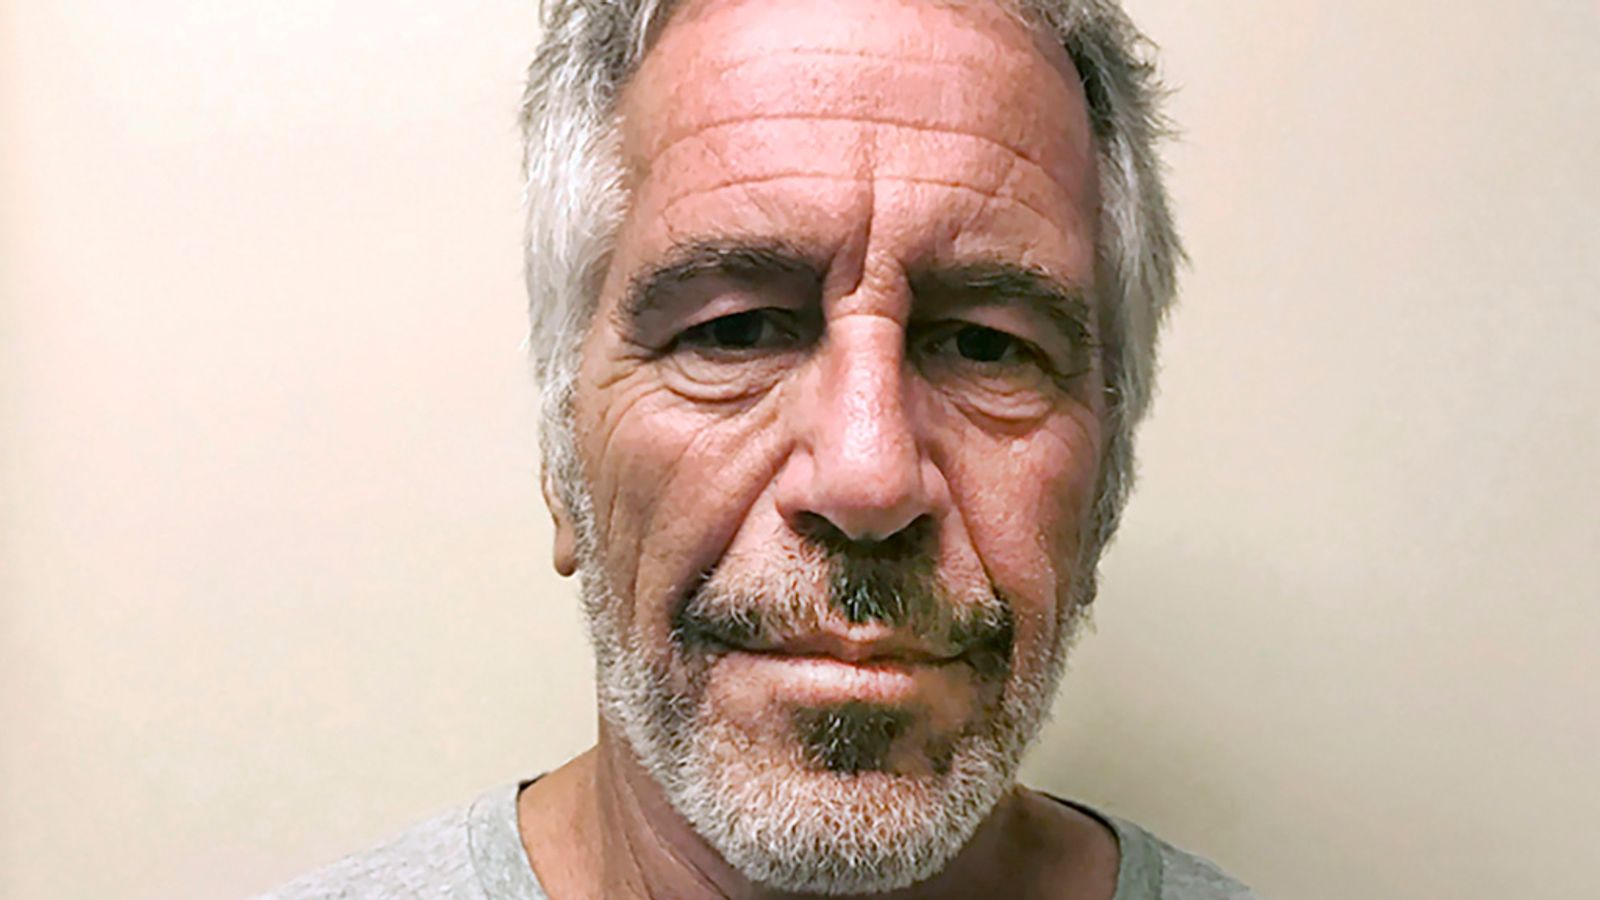 Jeffrey Epstein: JPMorgan reaches settlements with alleged victims and Jes Staley